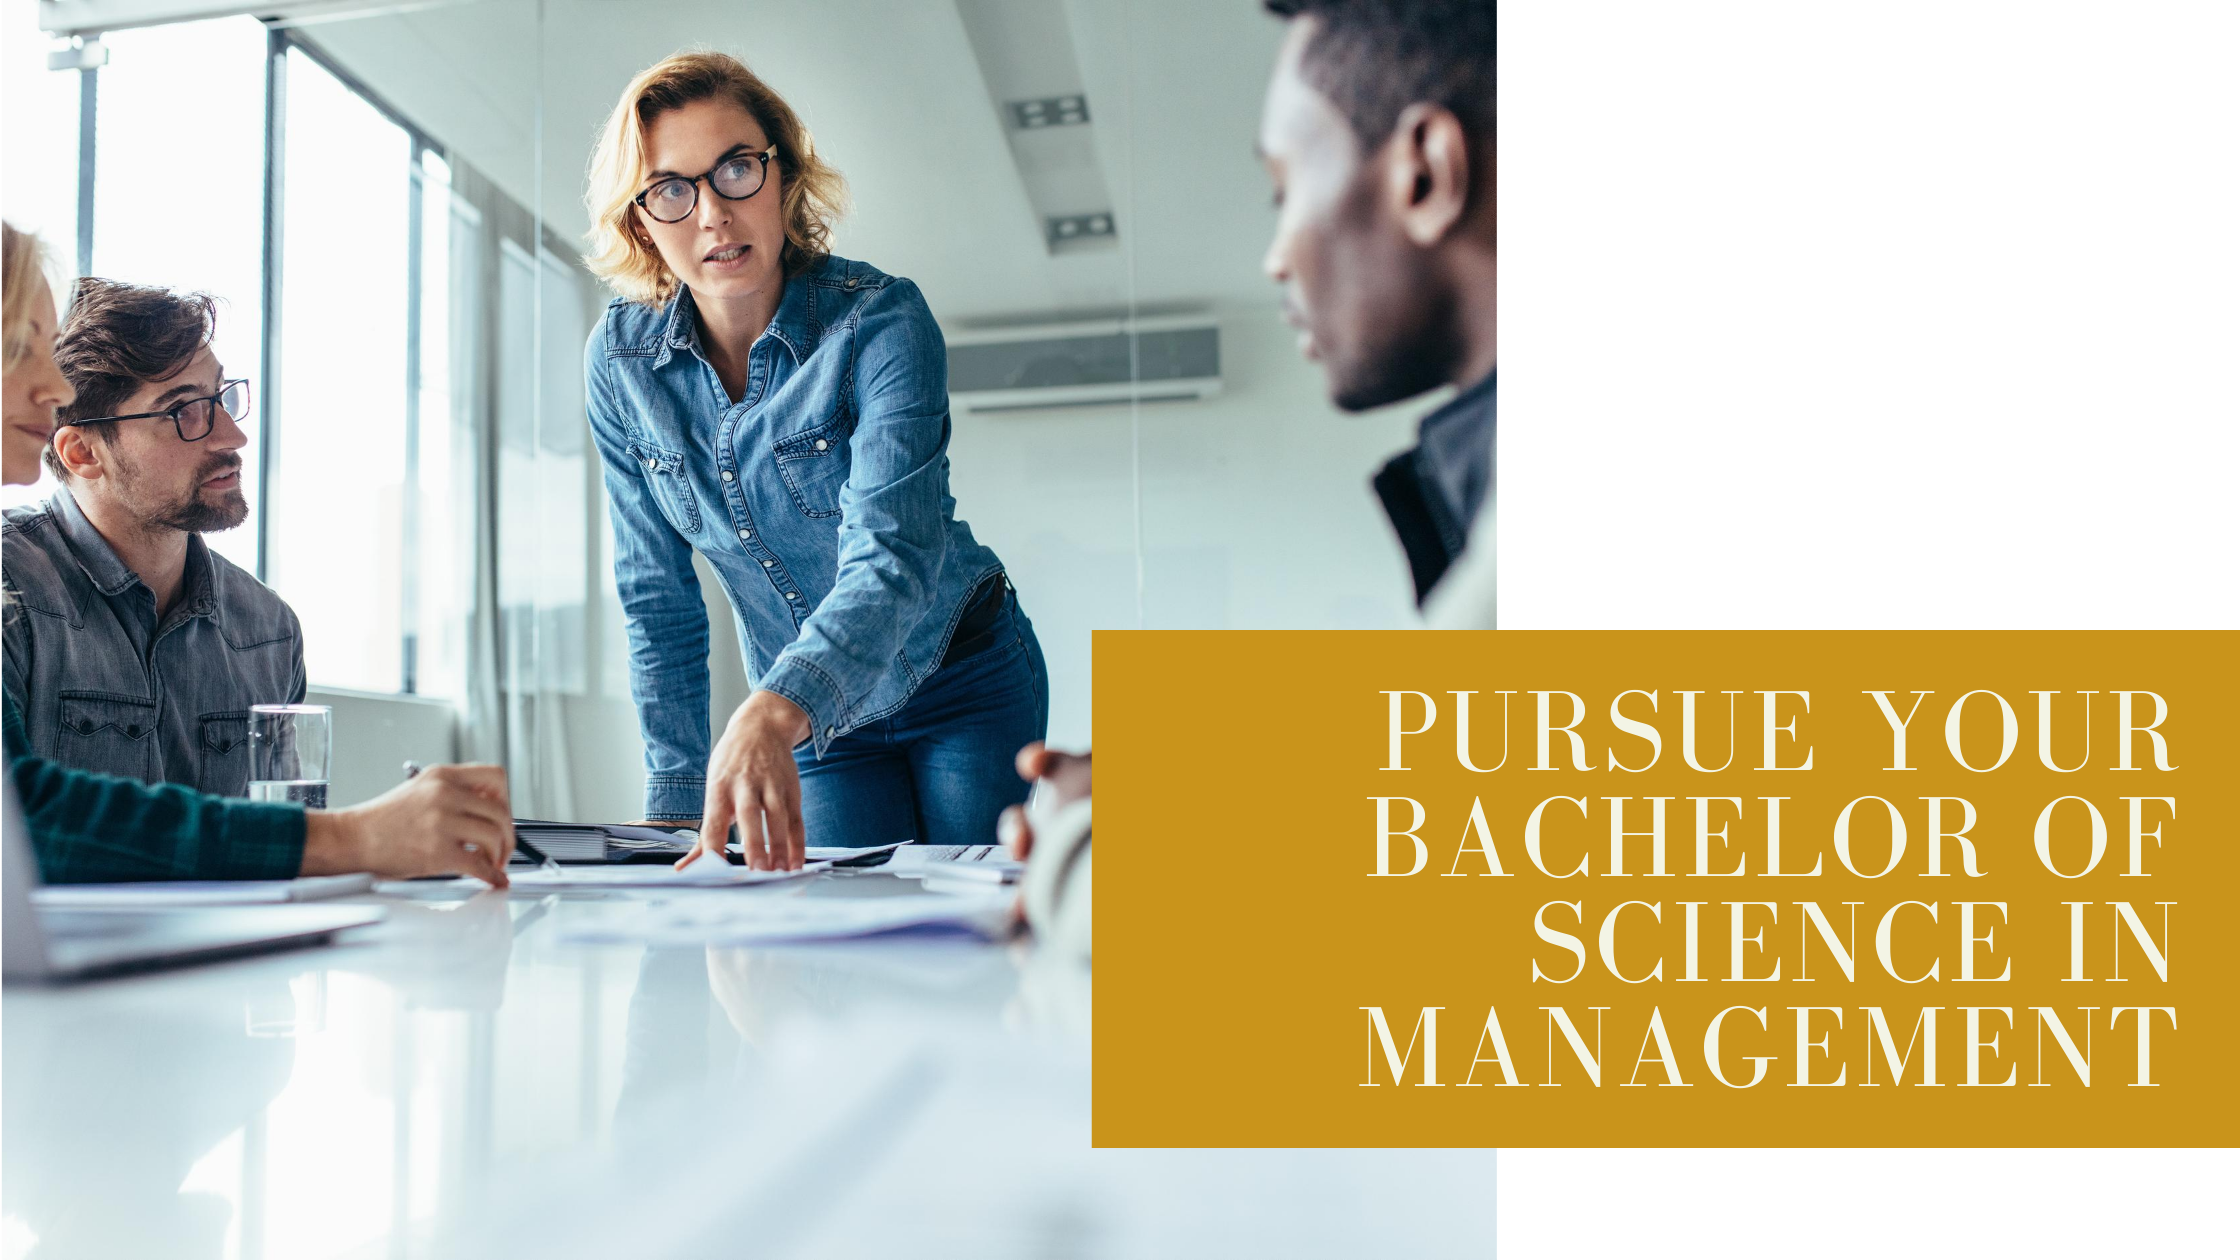 Compelling Reasons to Pursue Your Bachelor of Science in Management